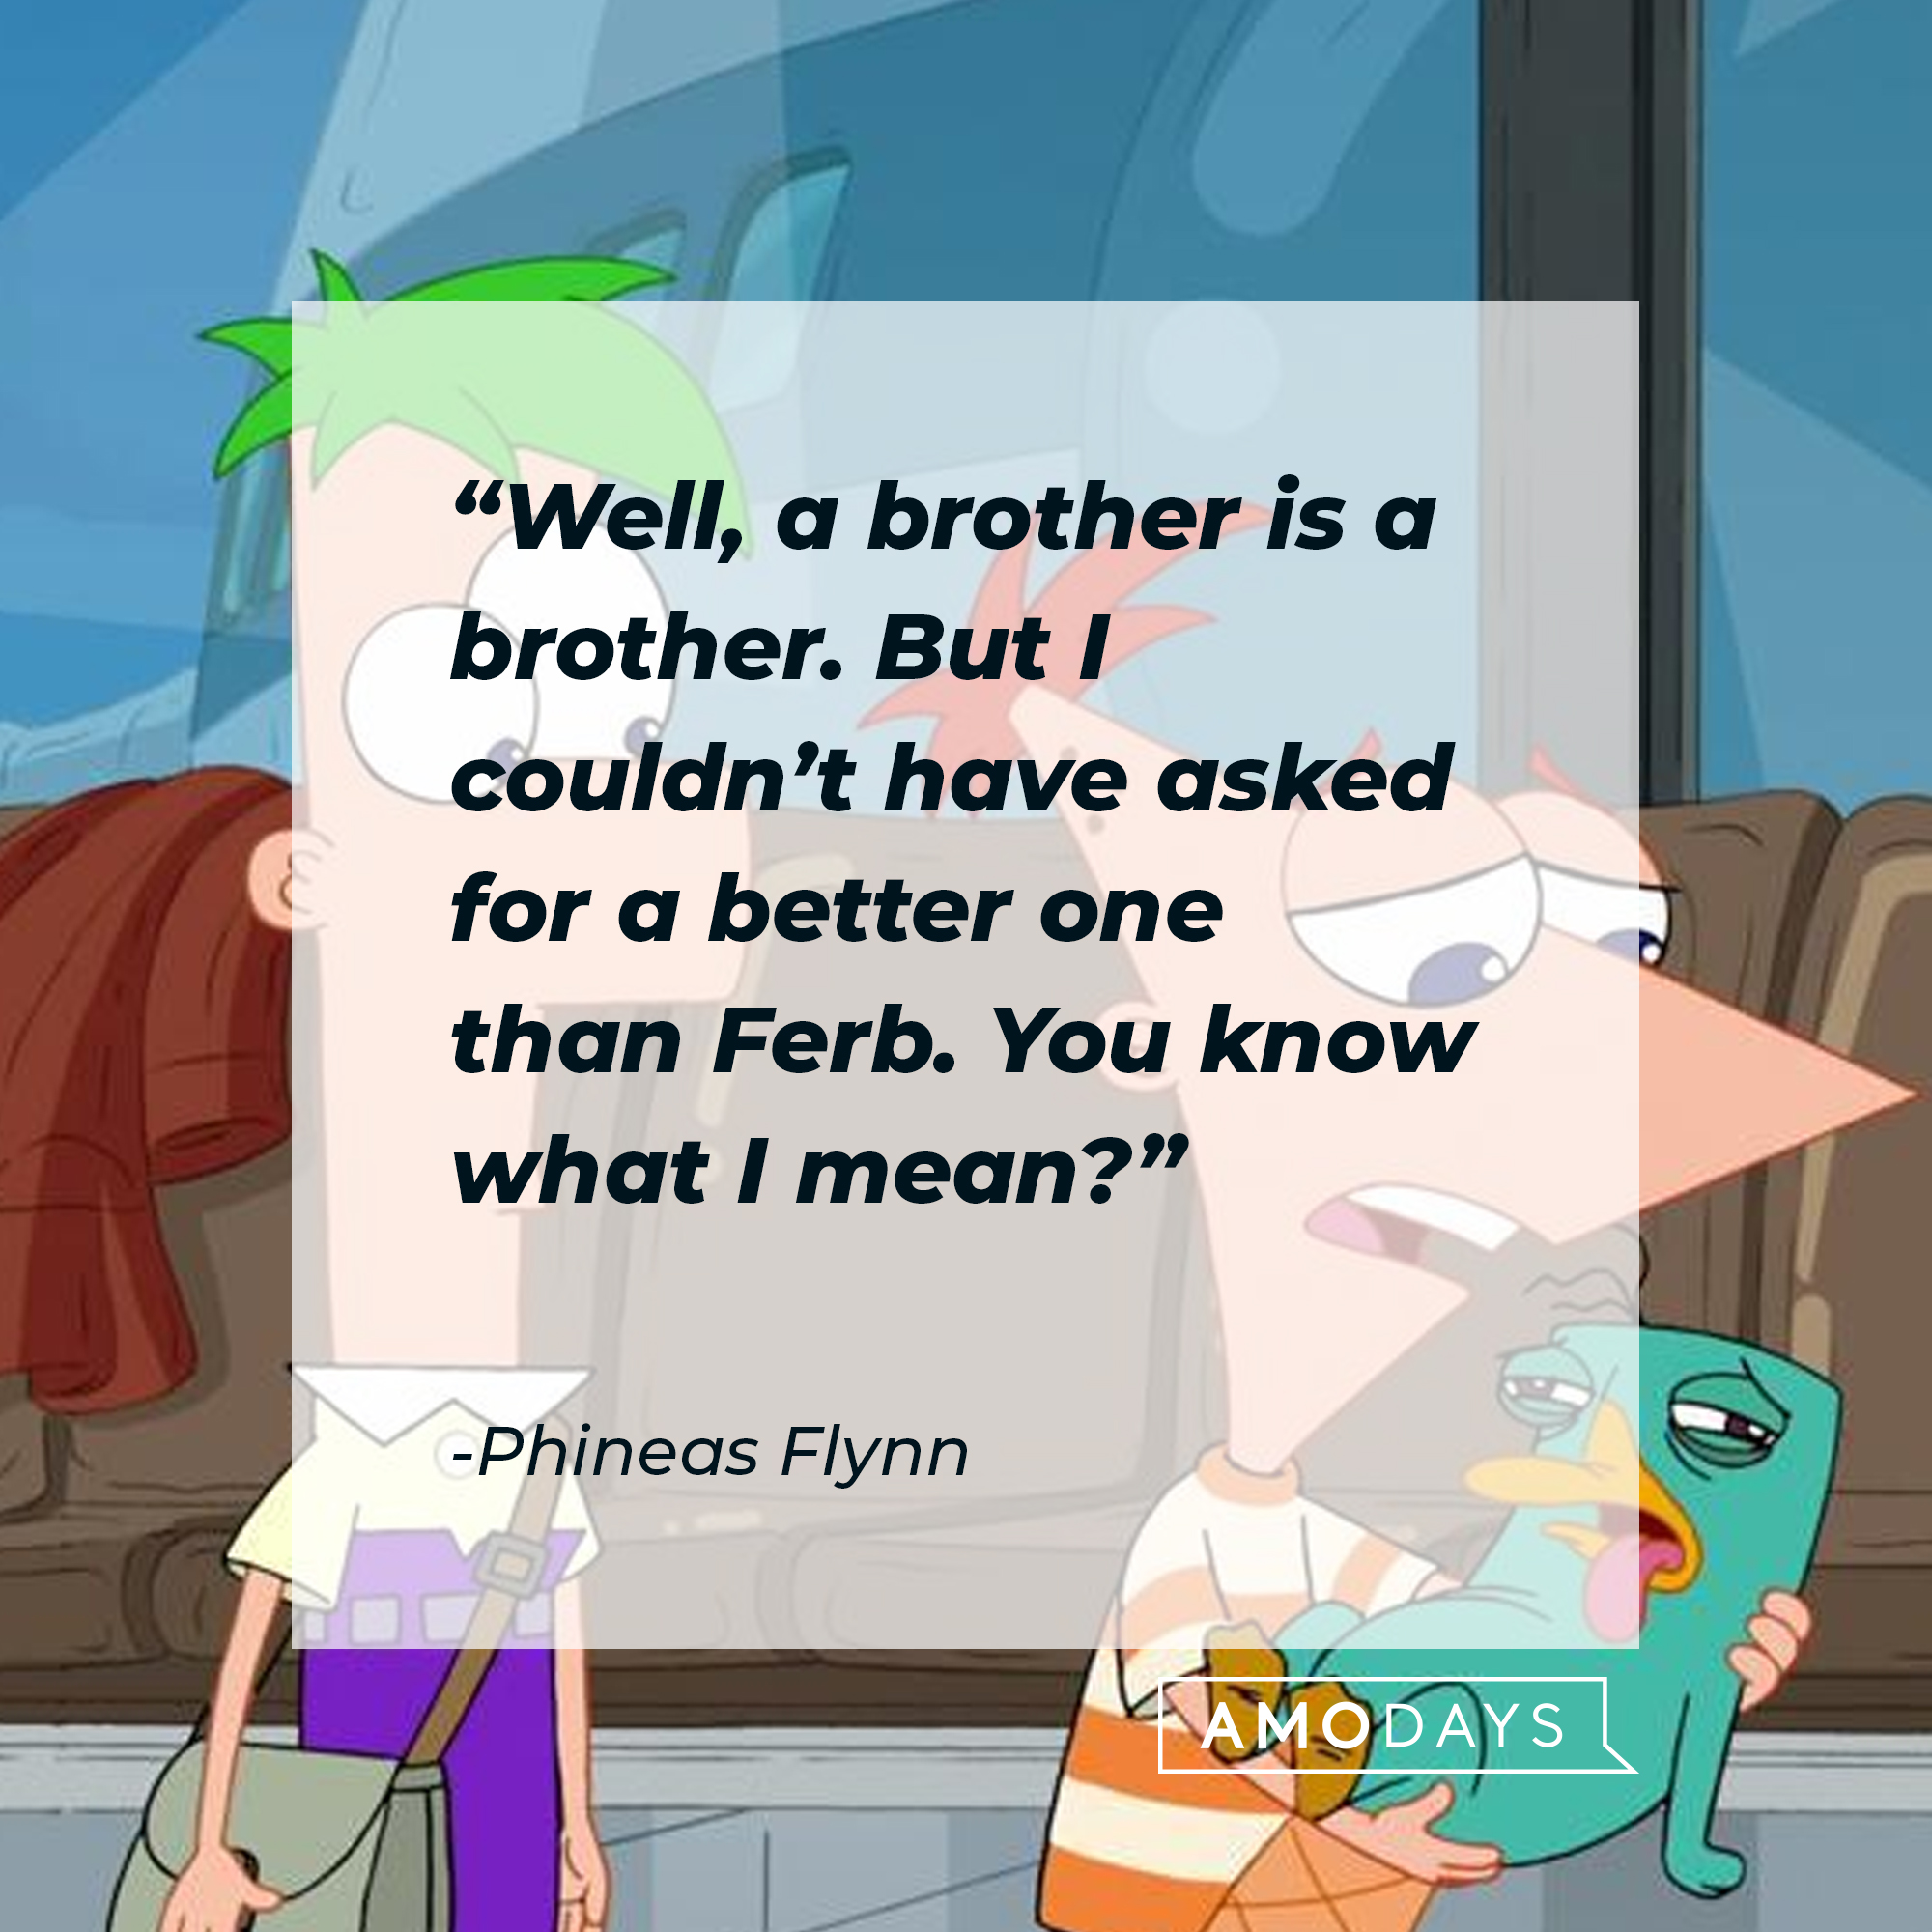 Phineas Flynn's quote: "Well, a brother is a brother. But I couldn't have asked for a better one than Ferb. You know what I mean?" | Source: facebook.com/Phineas-and-Ferb